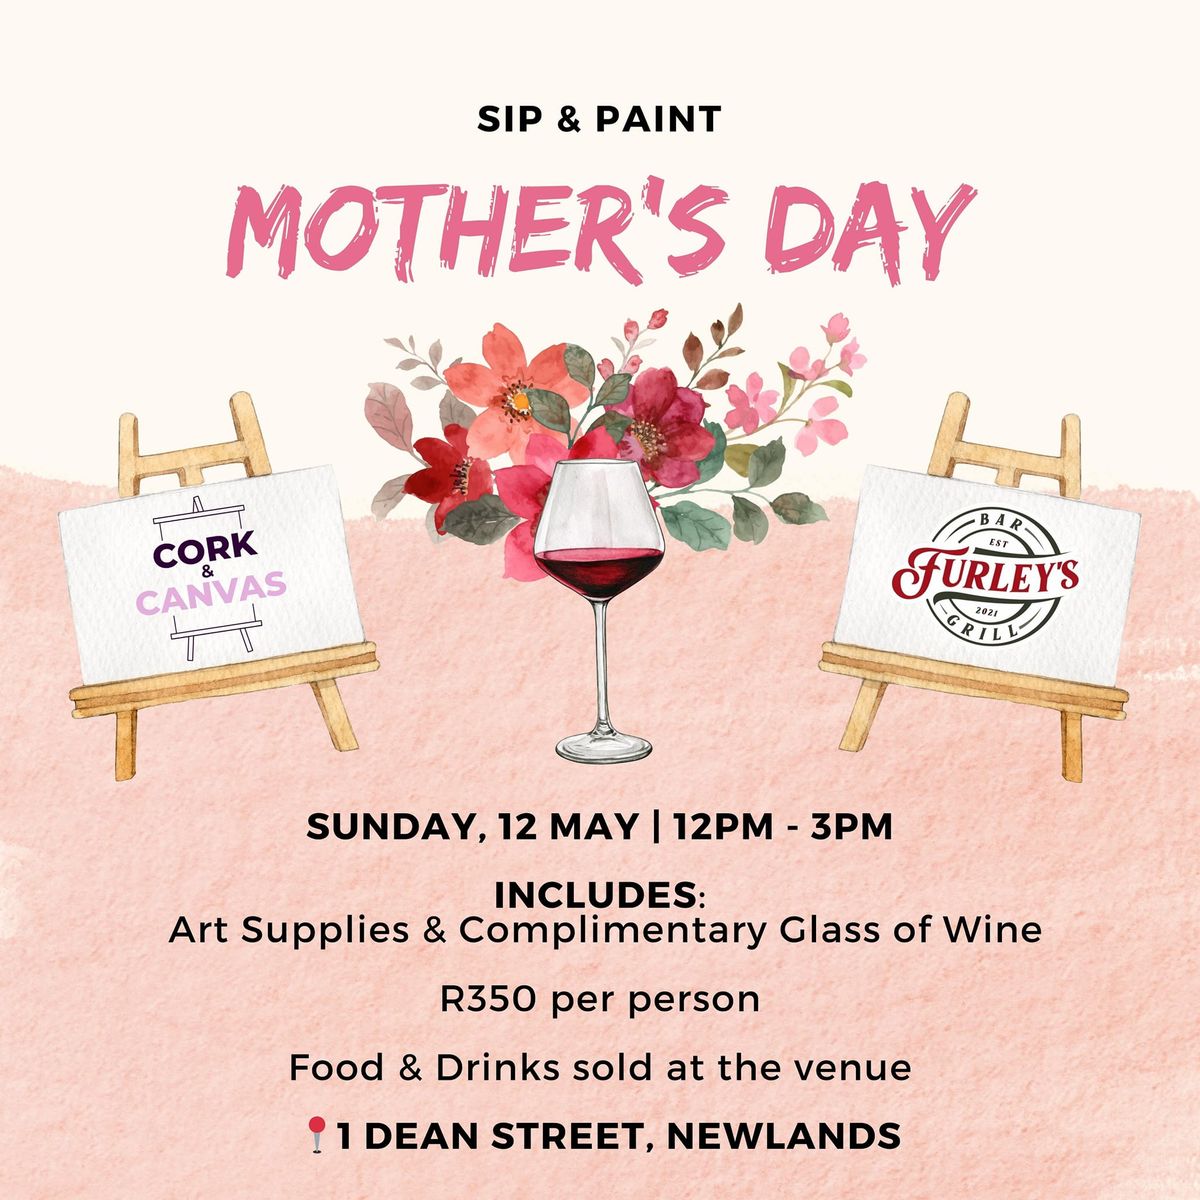 Mother's Day Sip & Paint 